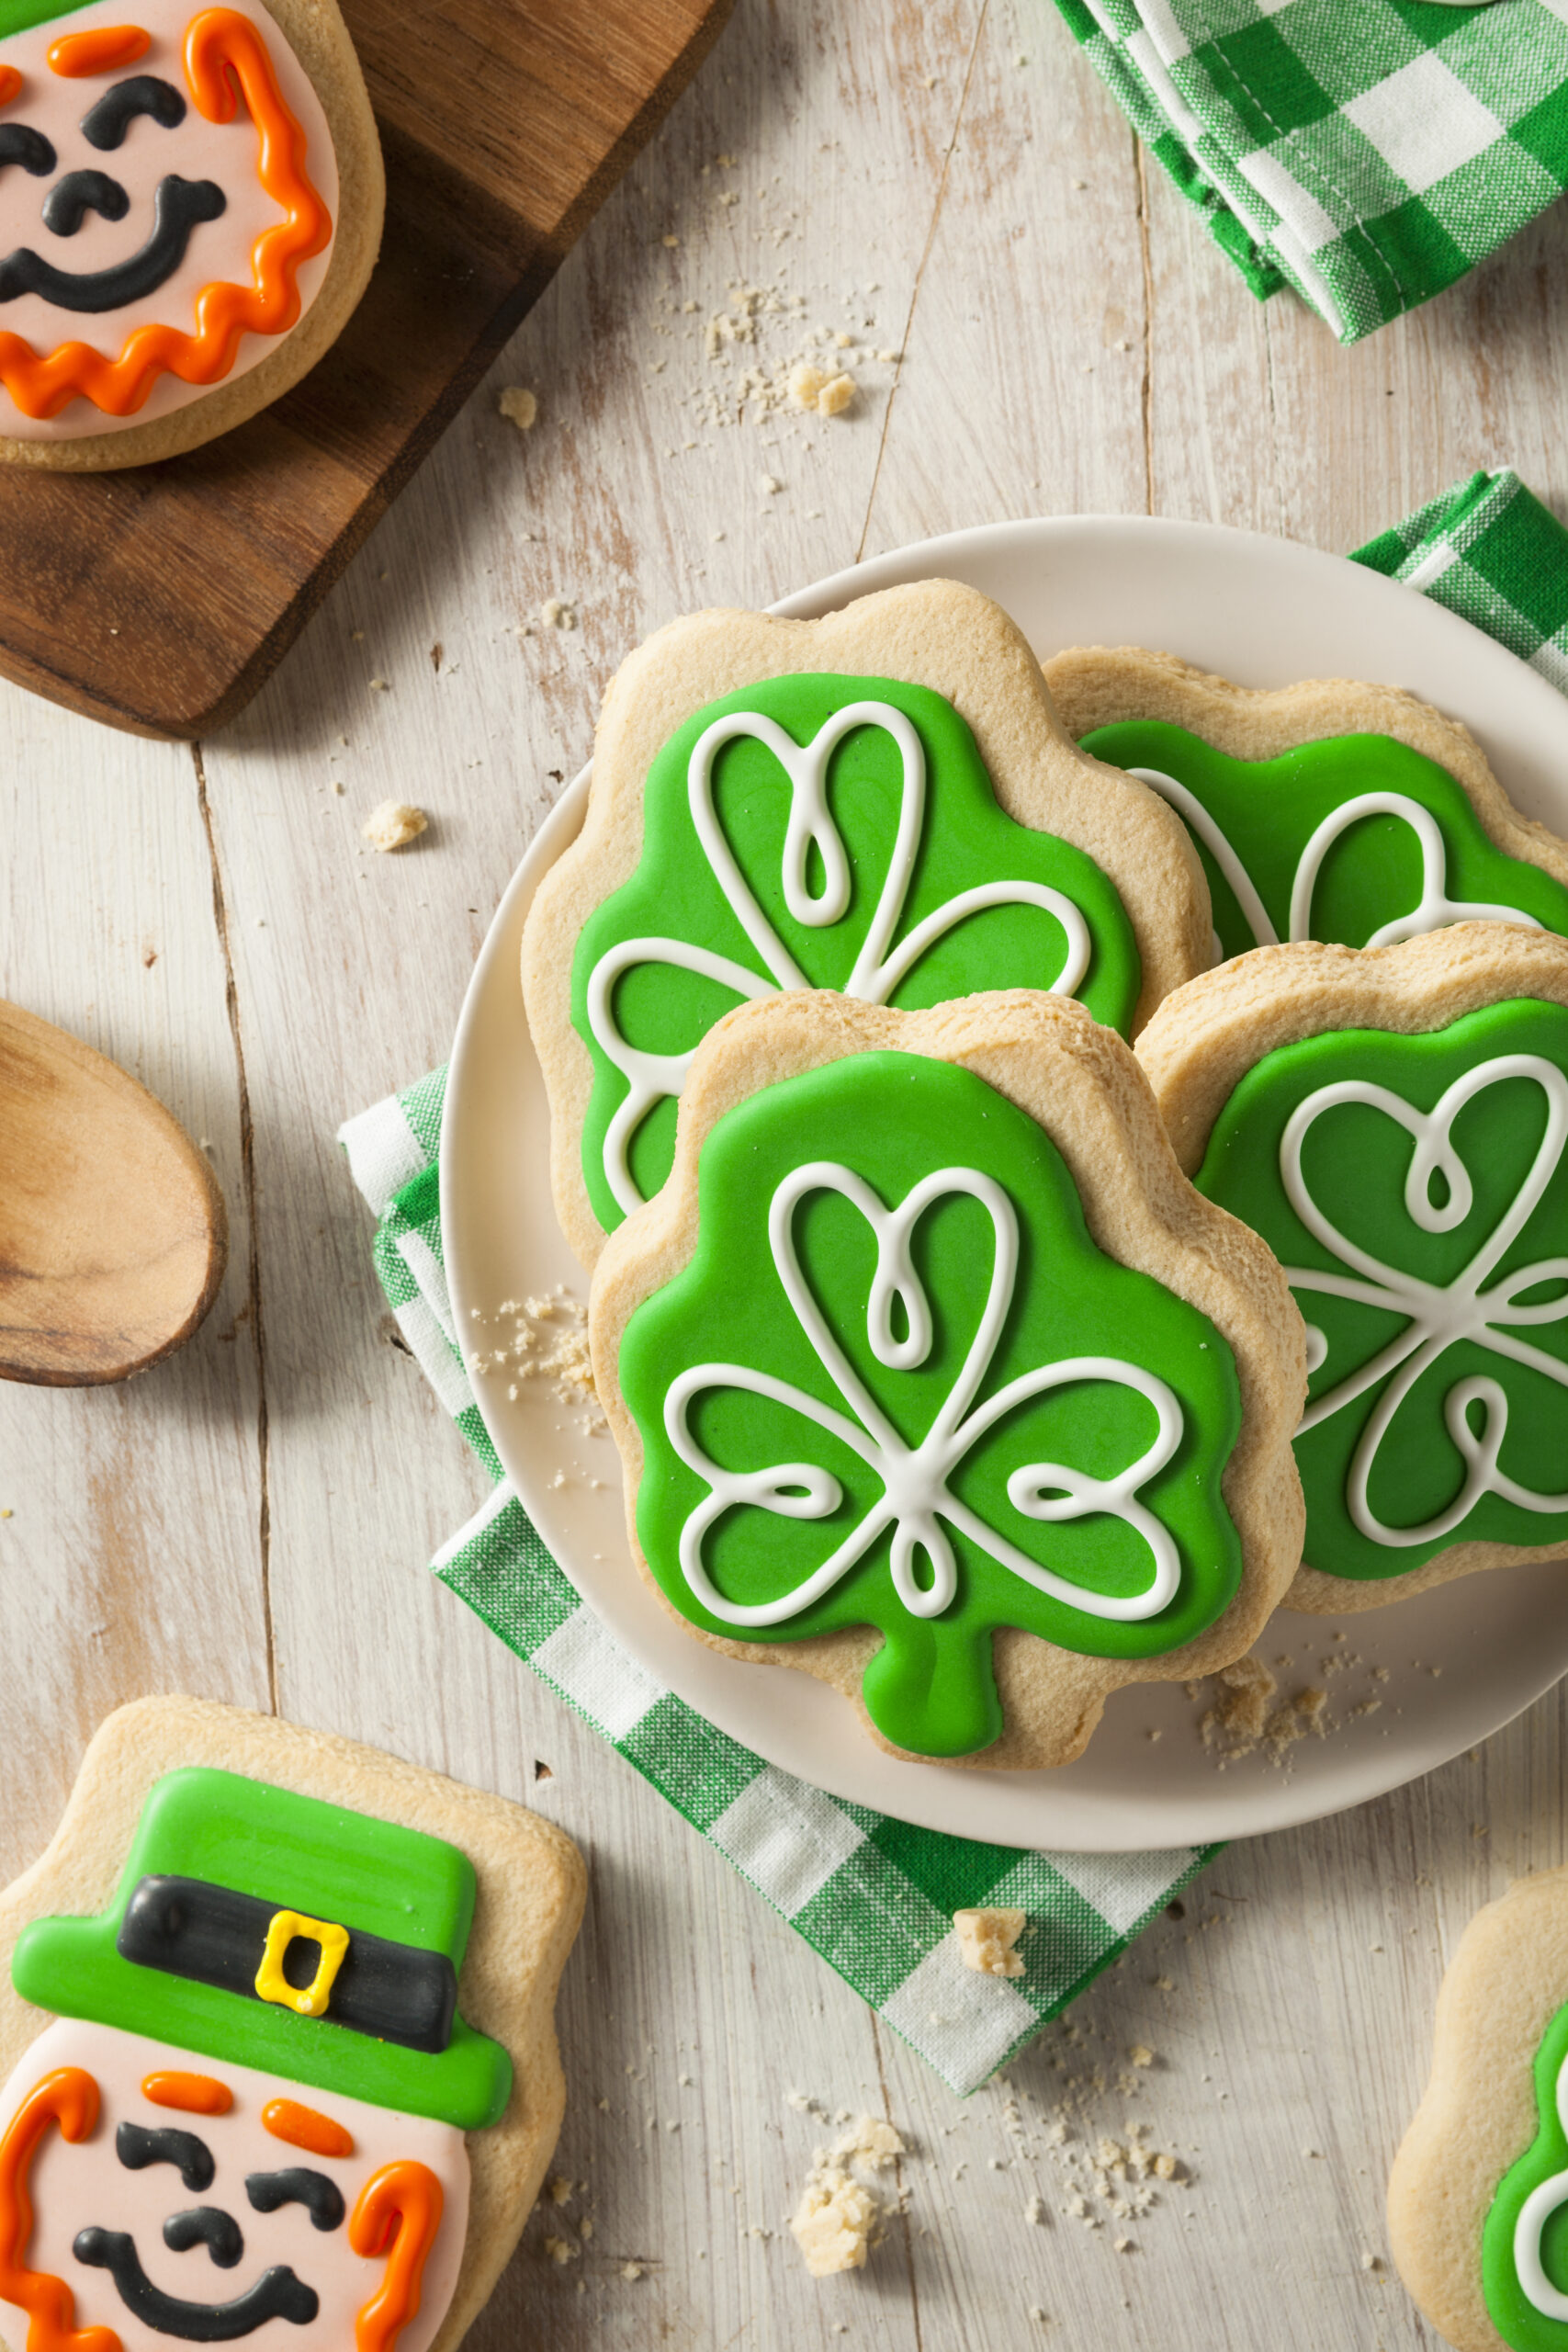 Green Clover St Patricks Day Cookies Ready to Eat - Top 10 St. Patrick's Day Dessert Recipes; St. Patrick's day recipes for desserts along with other green recipes for this Irish holiday!